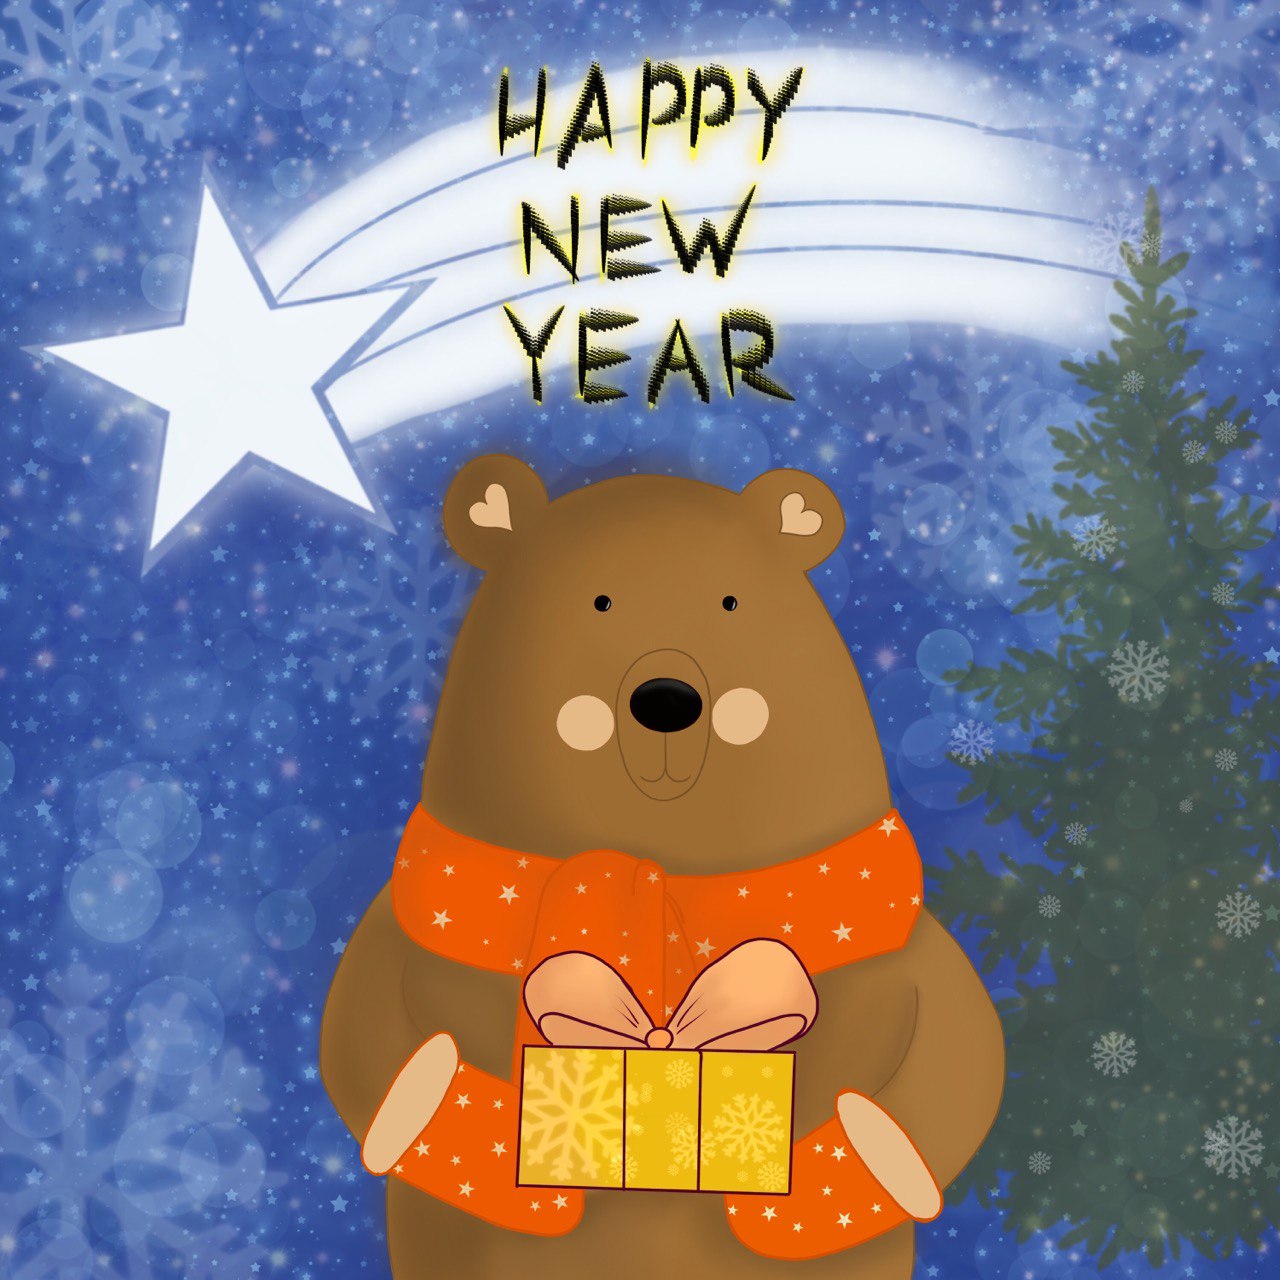 New Year's cards 2021